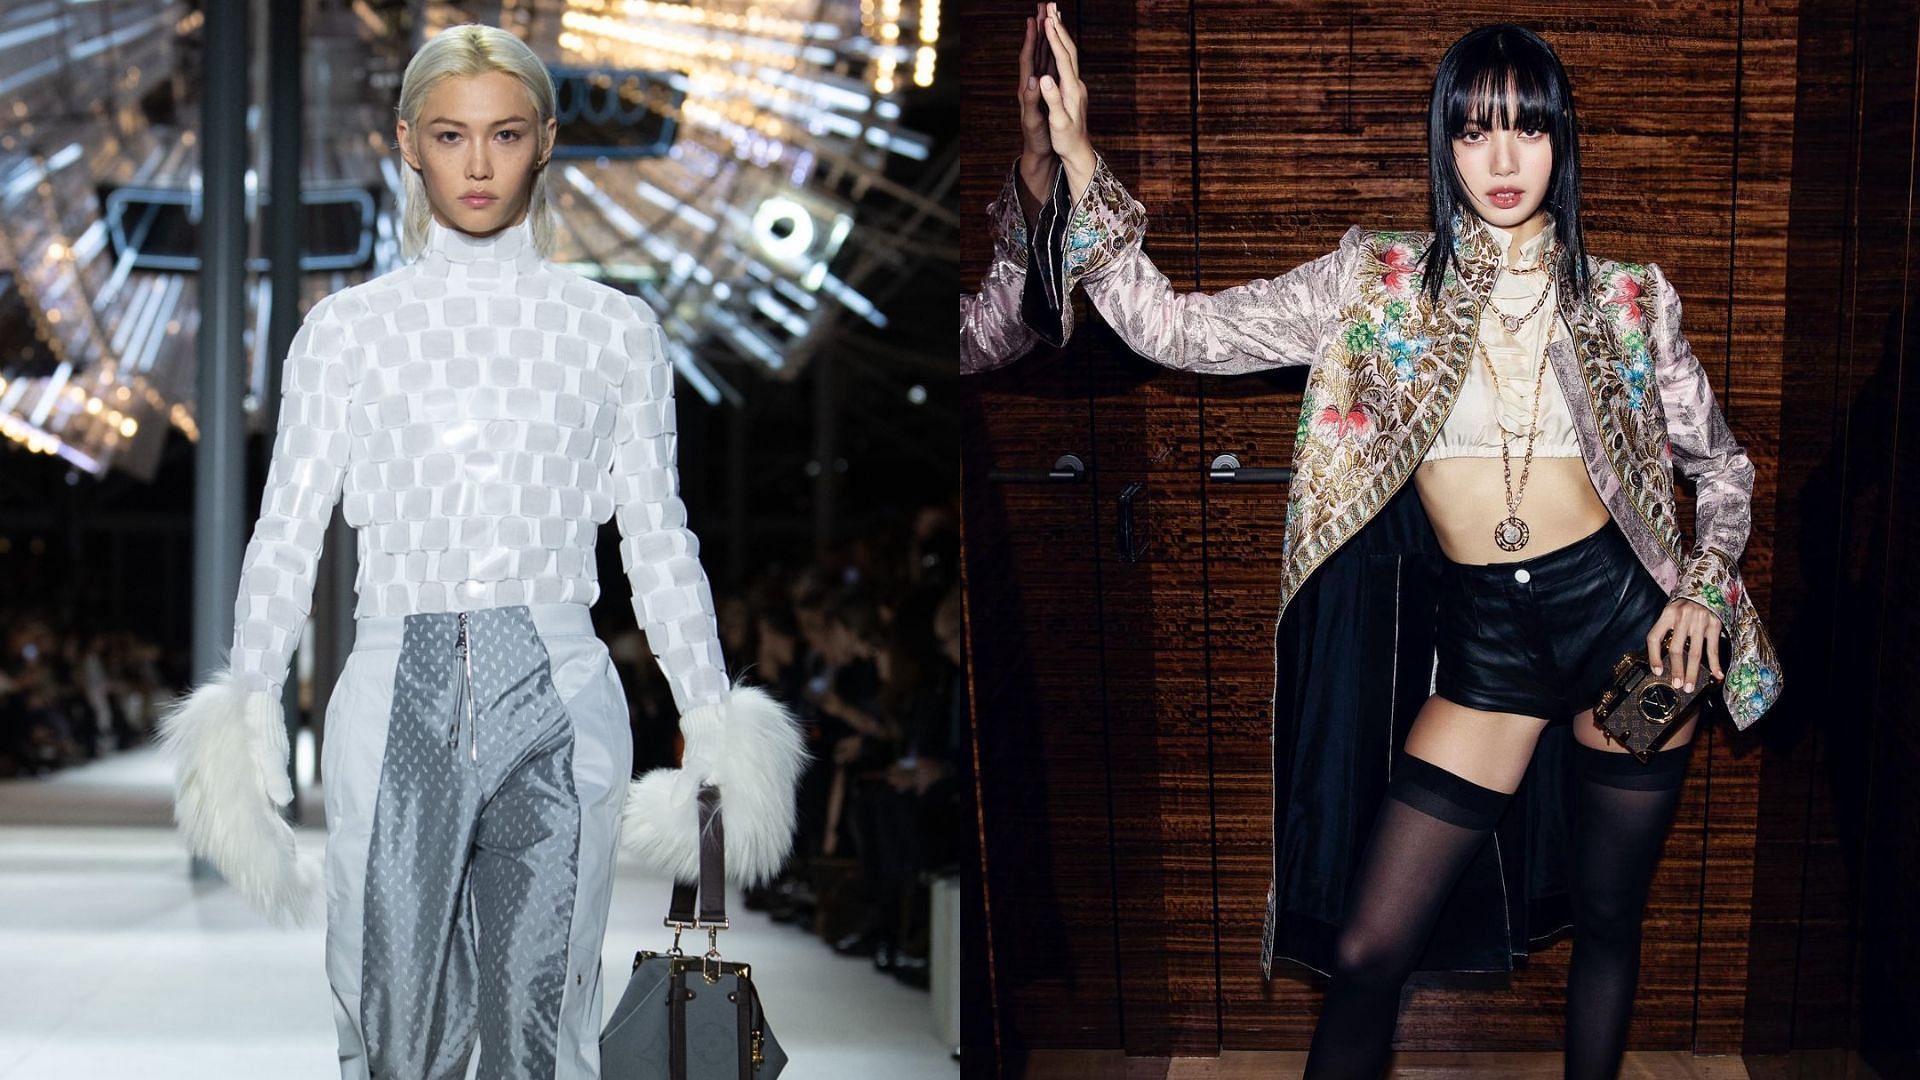 Lisa claps for Felix at the Paris Fashion Week (Images via Instagram/lalalisa_m and louisvuitton)